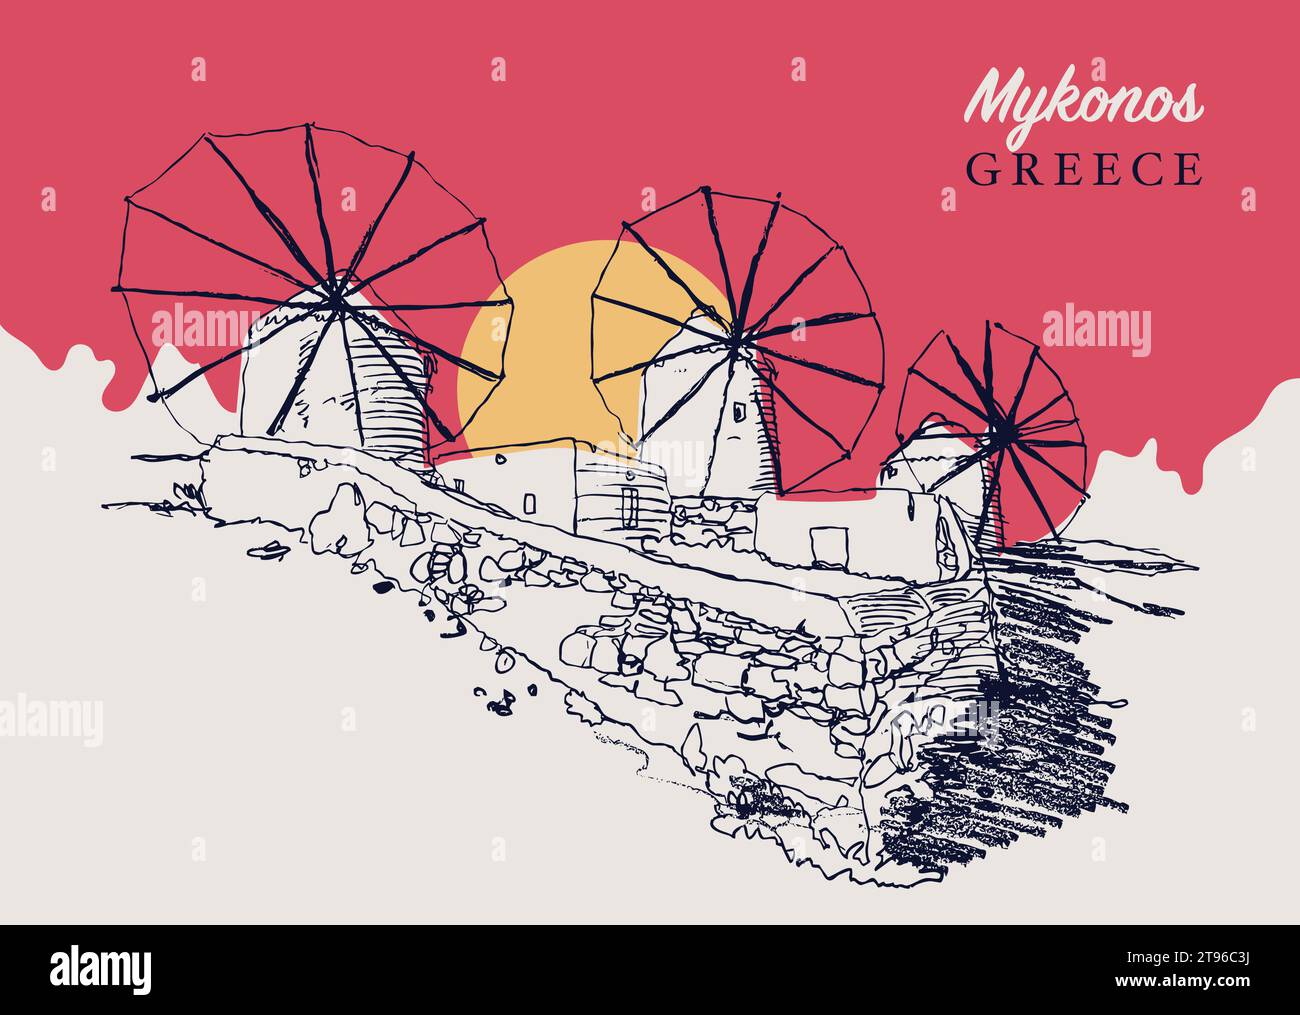 Vector hand drawn sketch illustration of the traditional Aegean windmills in the Greek island of Mykonos. Stock Vector